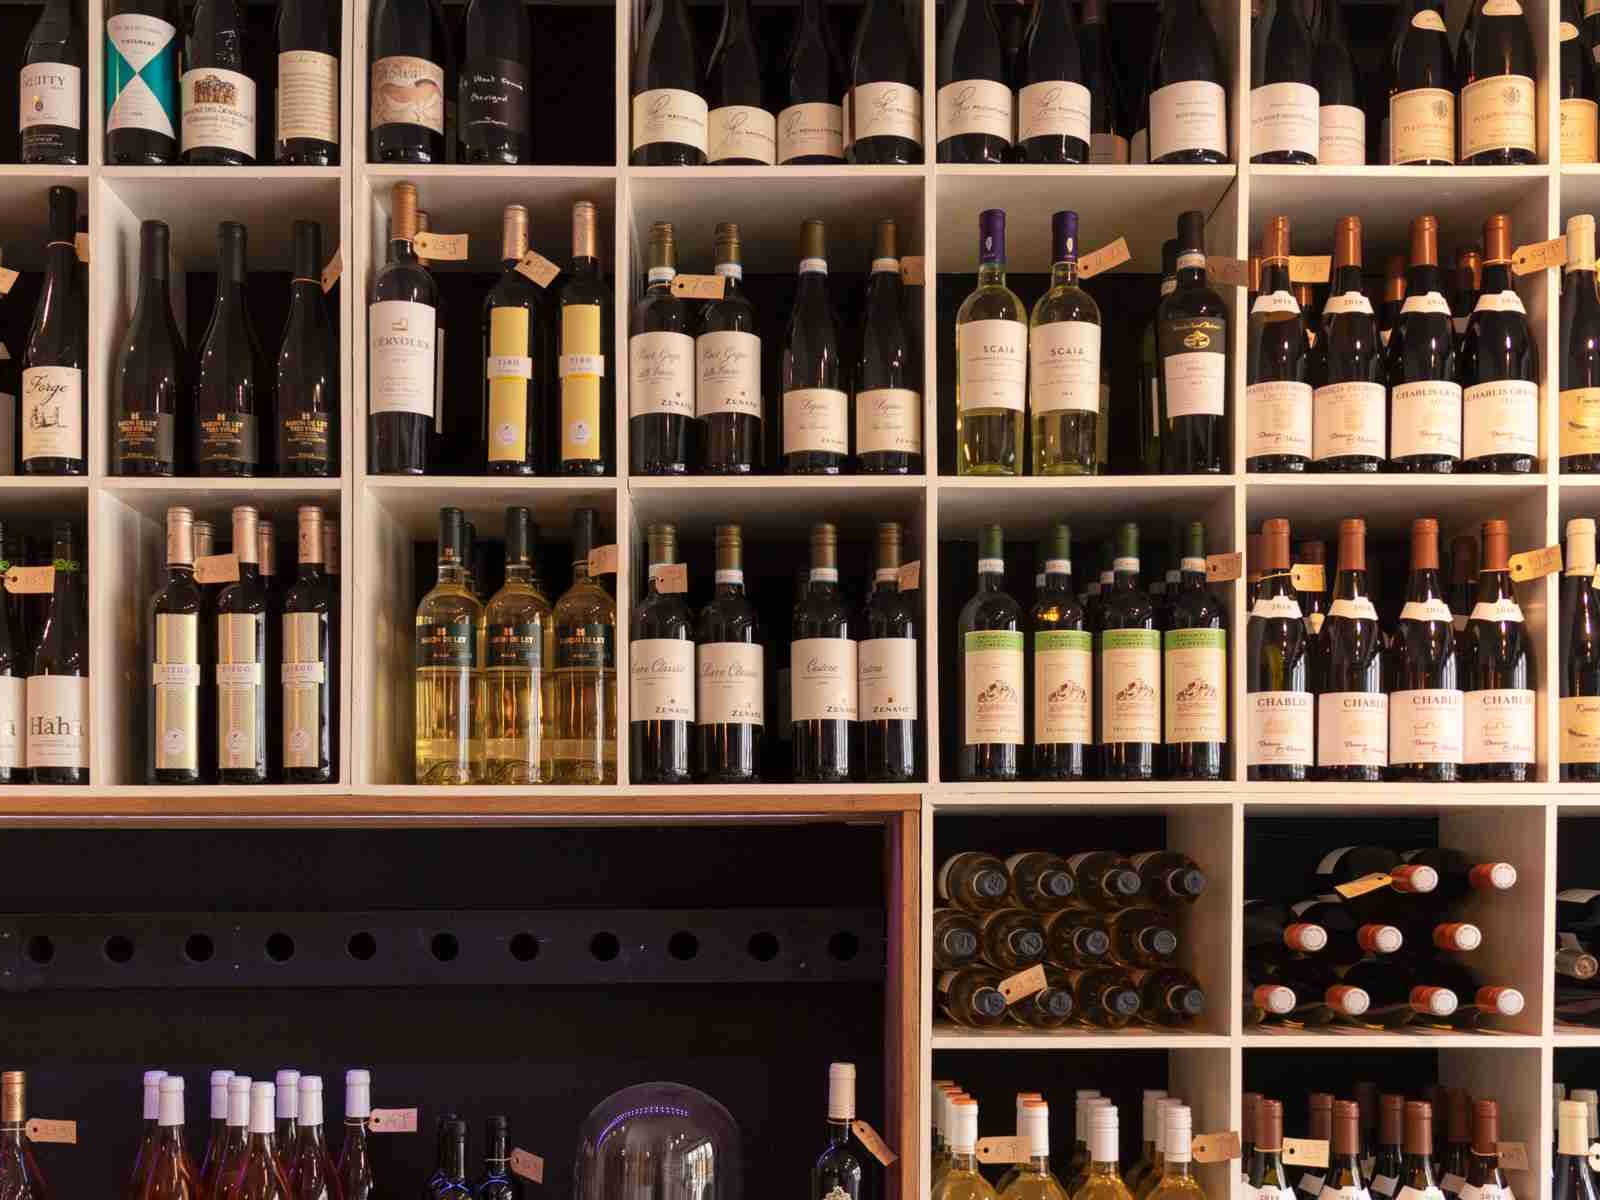 Spoilt for choice: your typical wine retail shelf